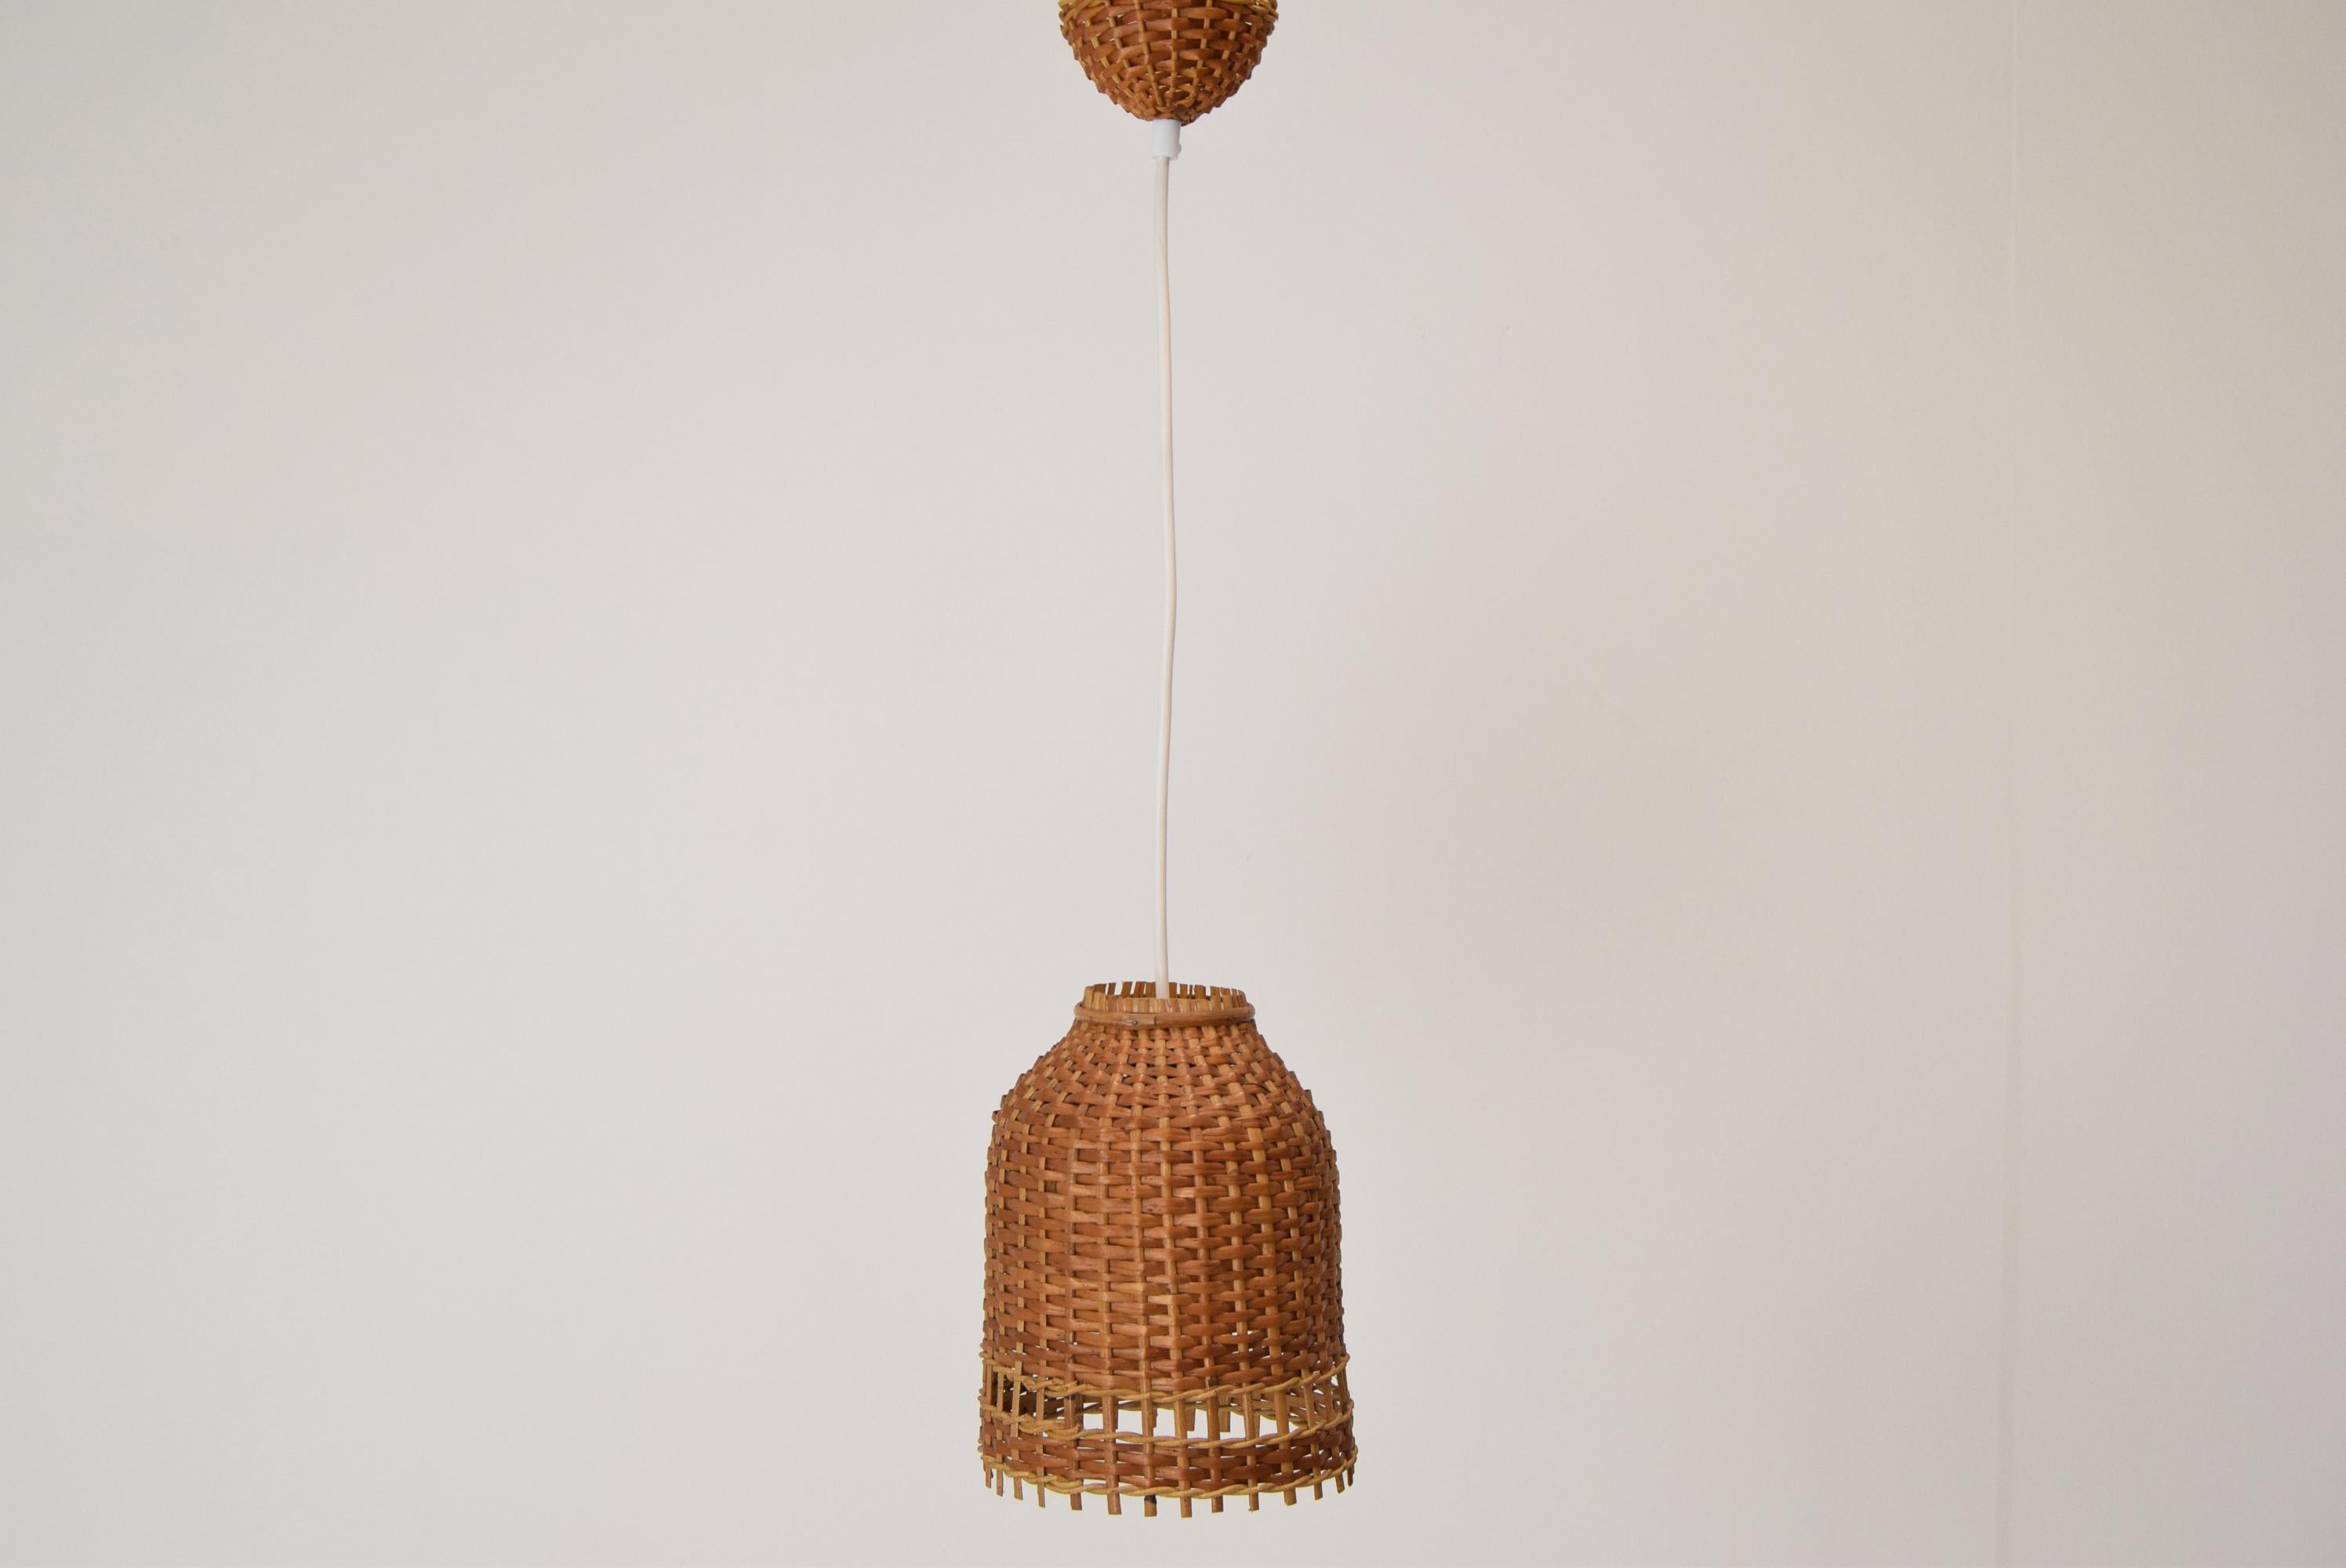 Made in Czechoslovakia
Made of Wicker and Wood
New Cabling
1xE27 or E26 Bulb 
Original Condition 
US Wiring Compatible.